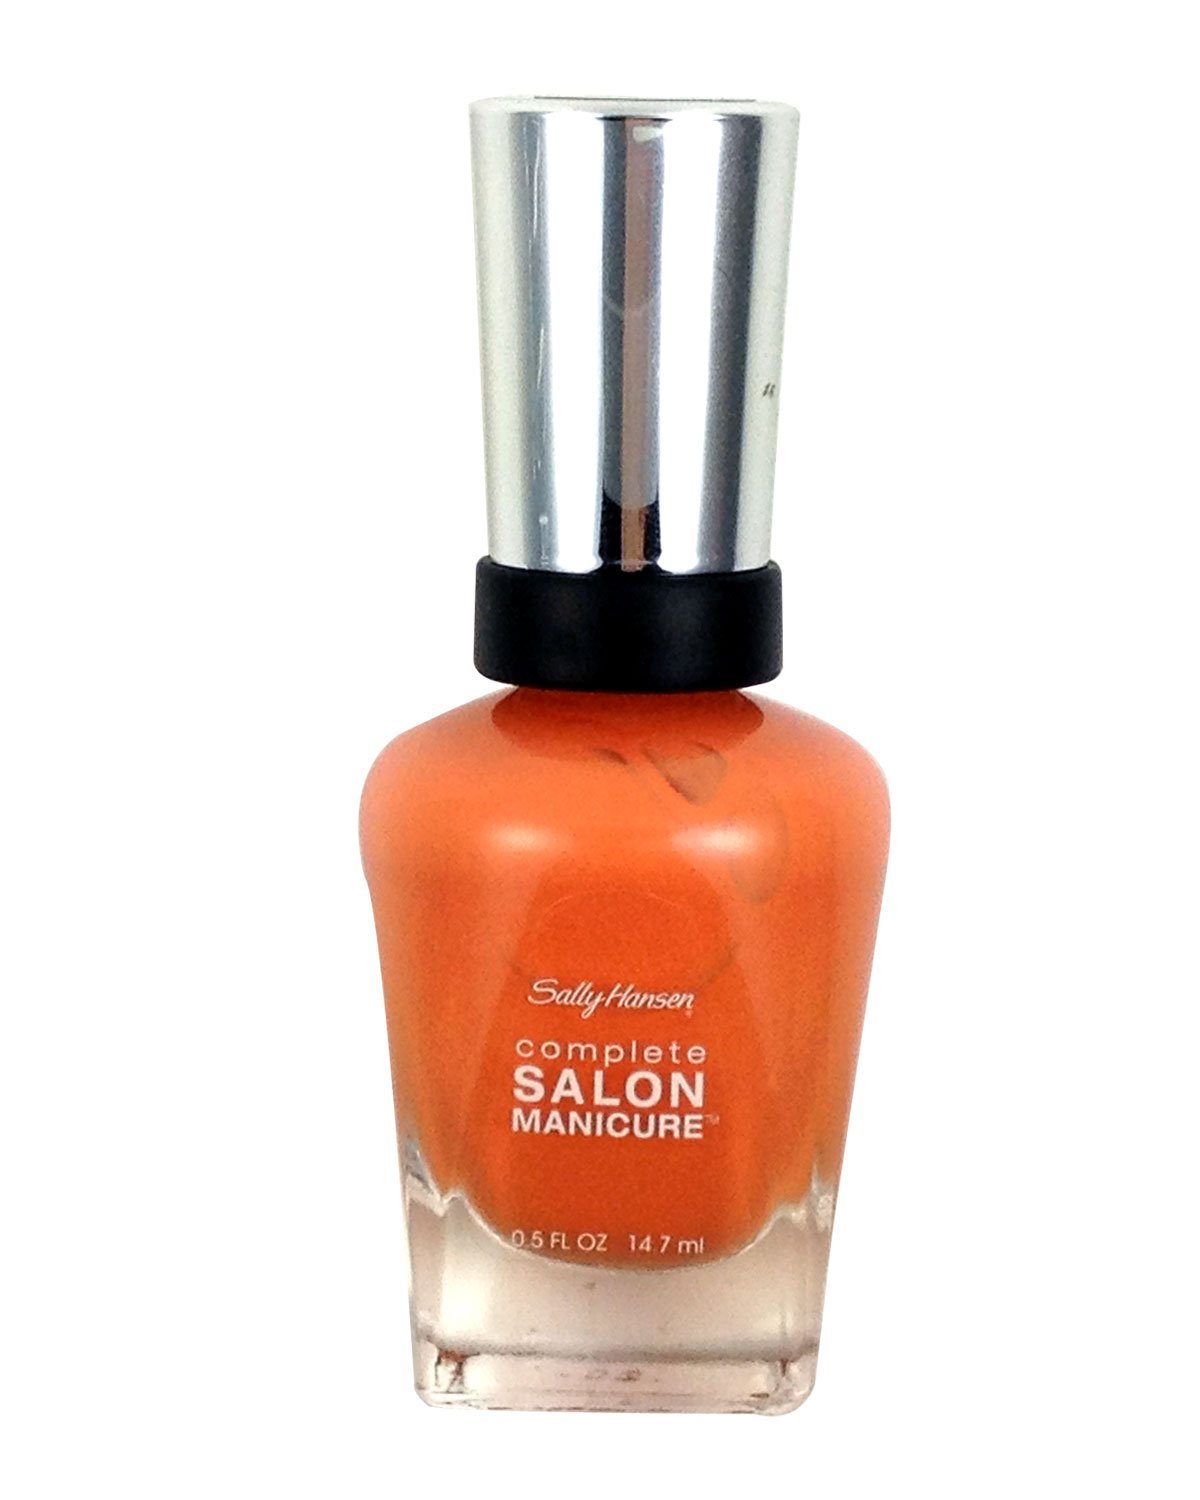 Primary image for Sally Hansen, Complete Salon Manicure, 844 - On the Mango